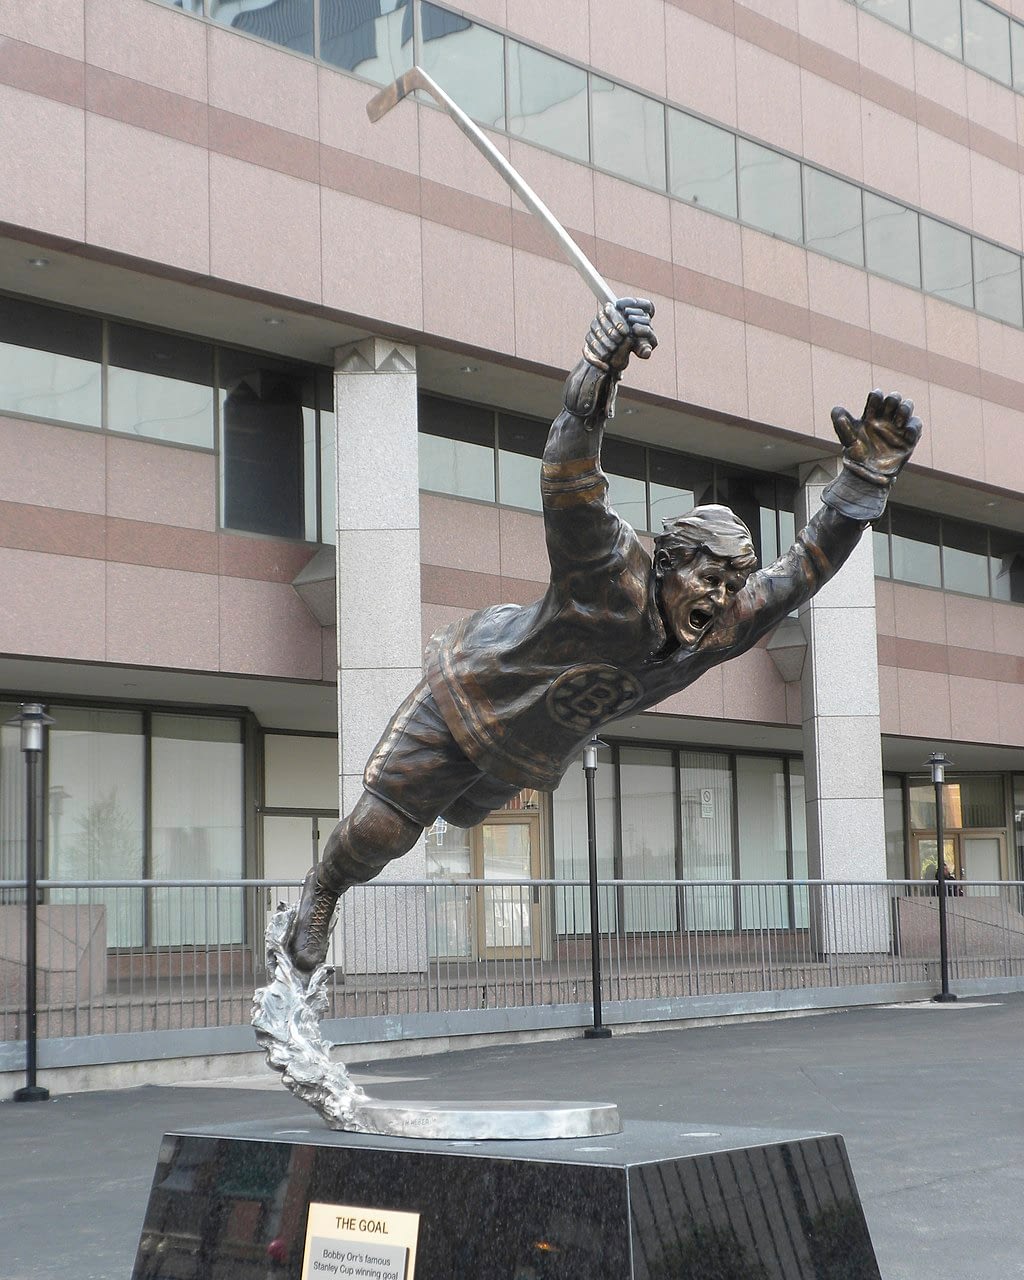 In analyzing our strengths and weaknesses we often focus on the peak-end rule, Bobby Orr's classic diving goal is an example of a peak moment.